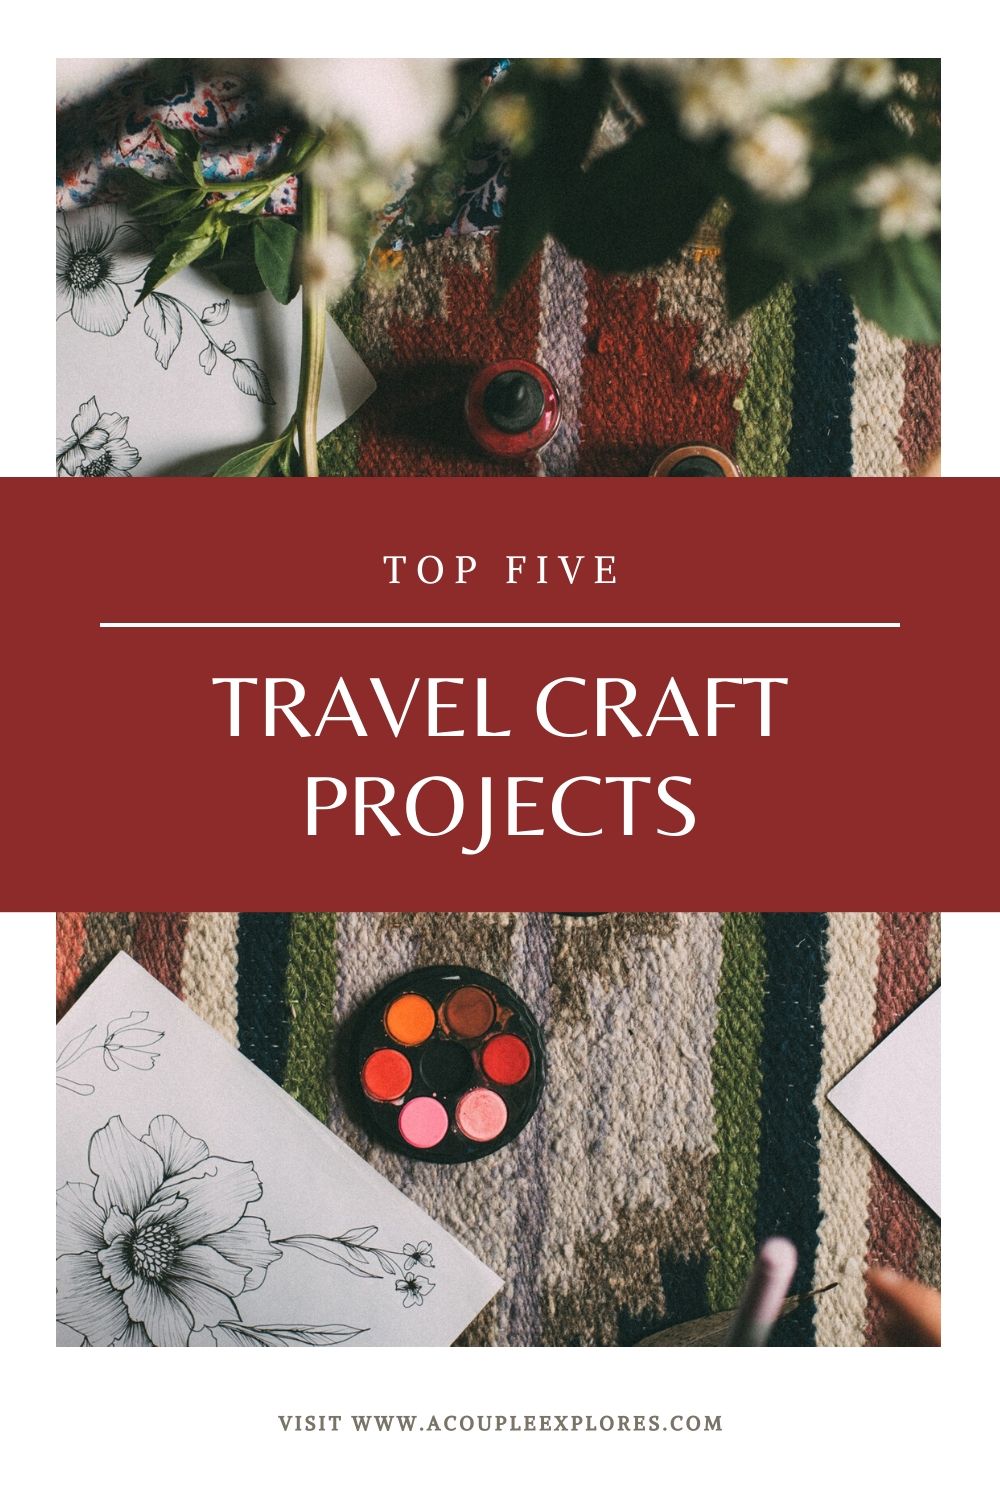 Top Five Travel Craft Projects #travelcrafts #travelmemories #vacationmemories #crafting #travelcrafts